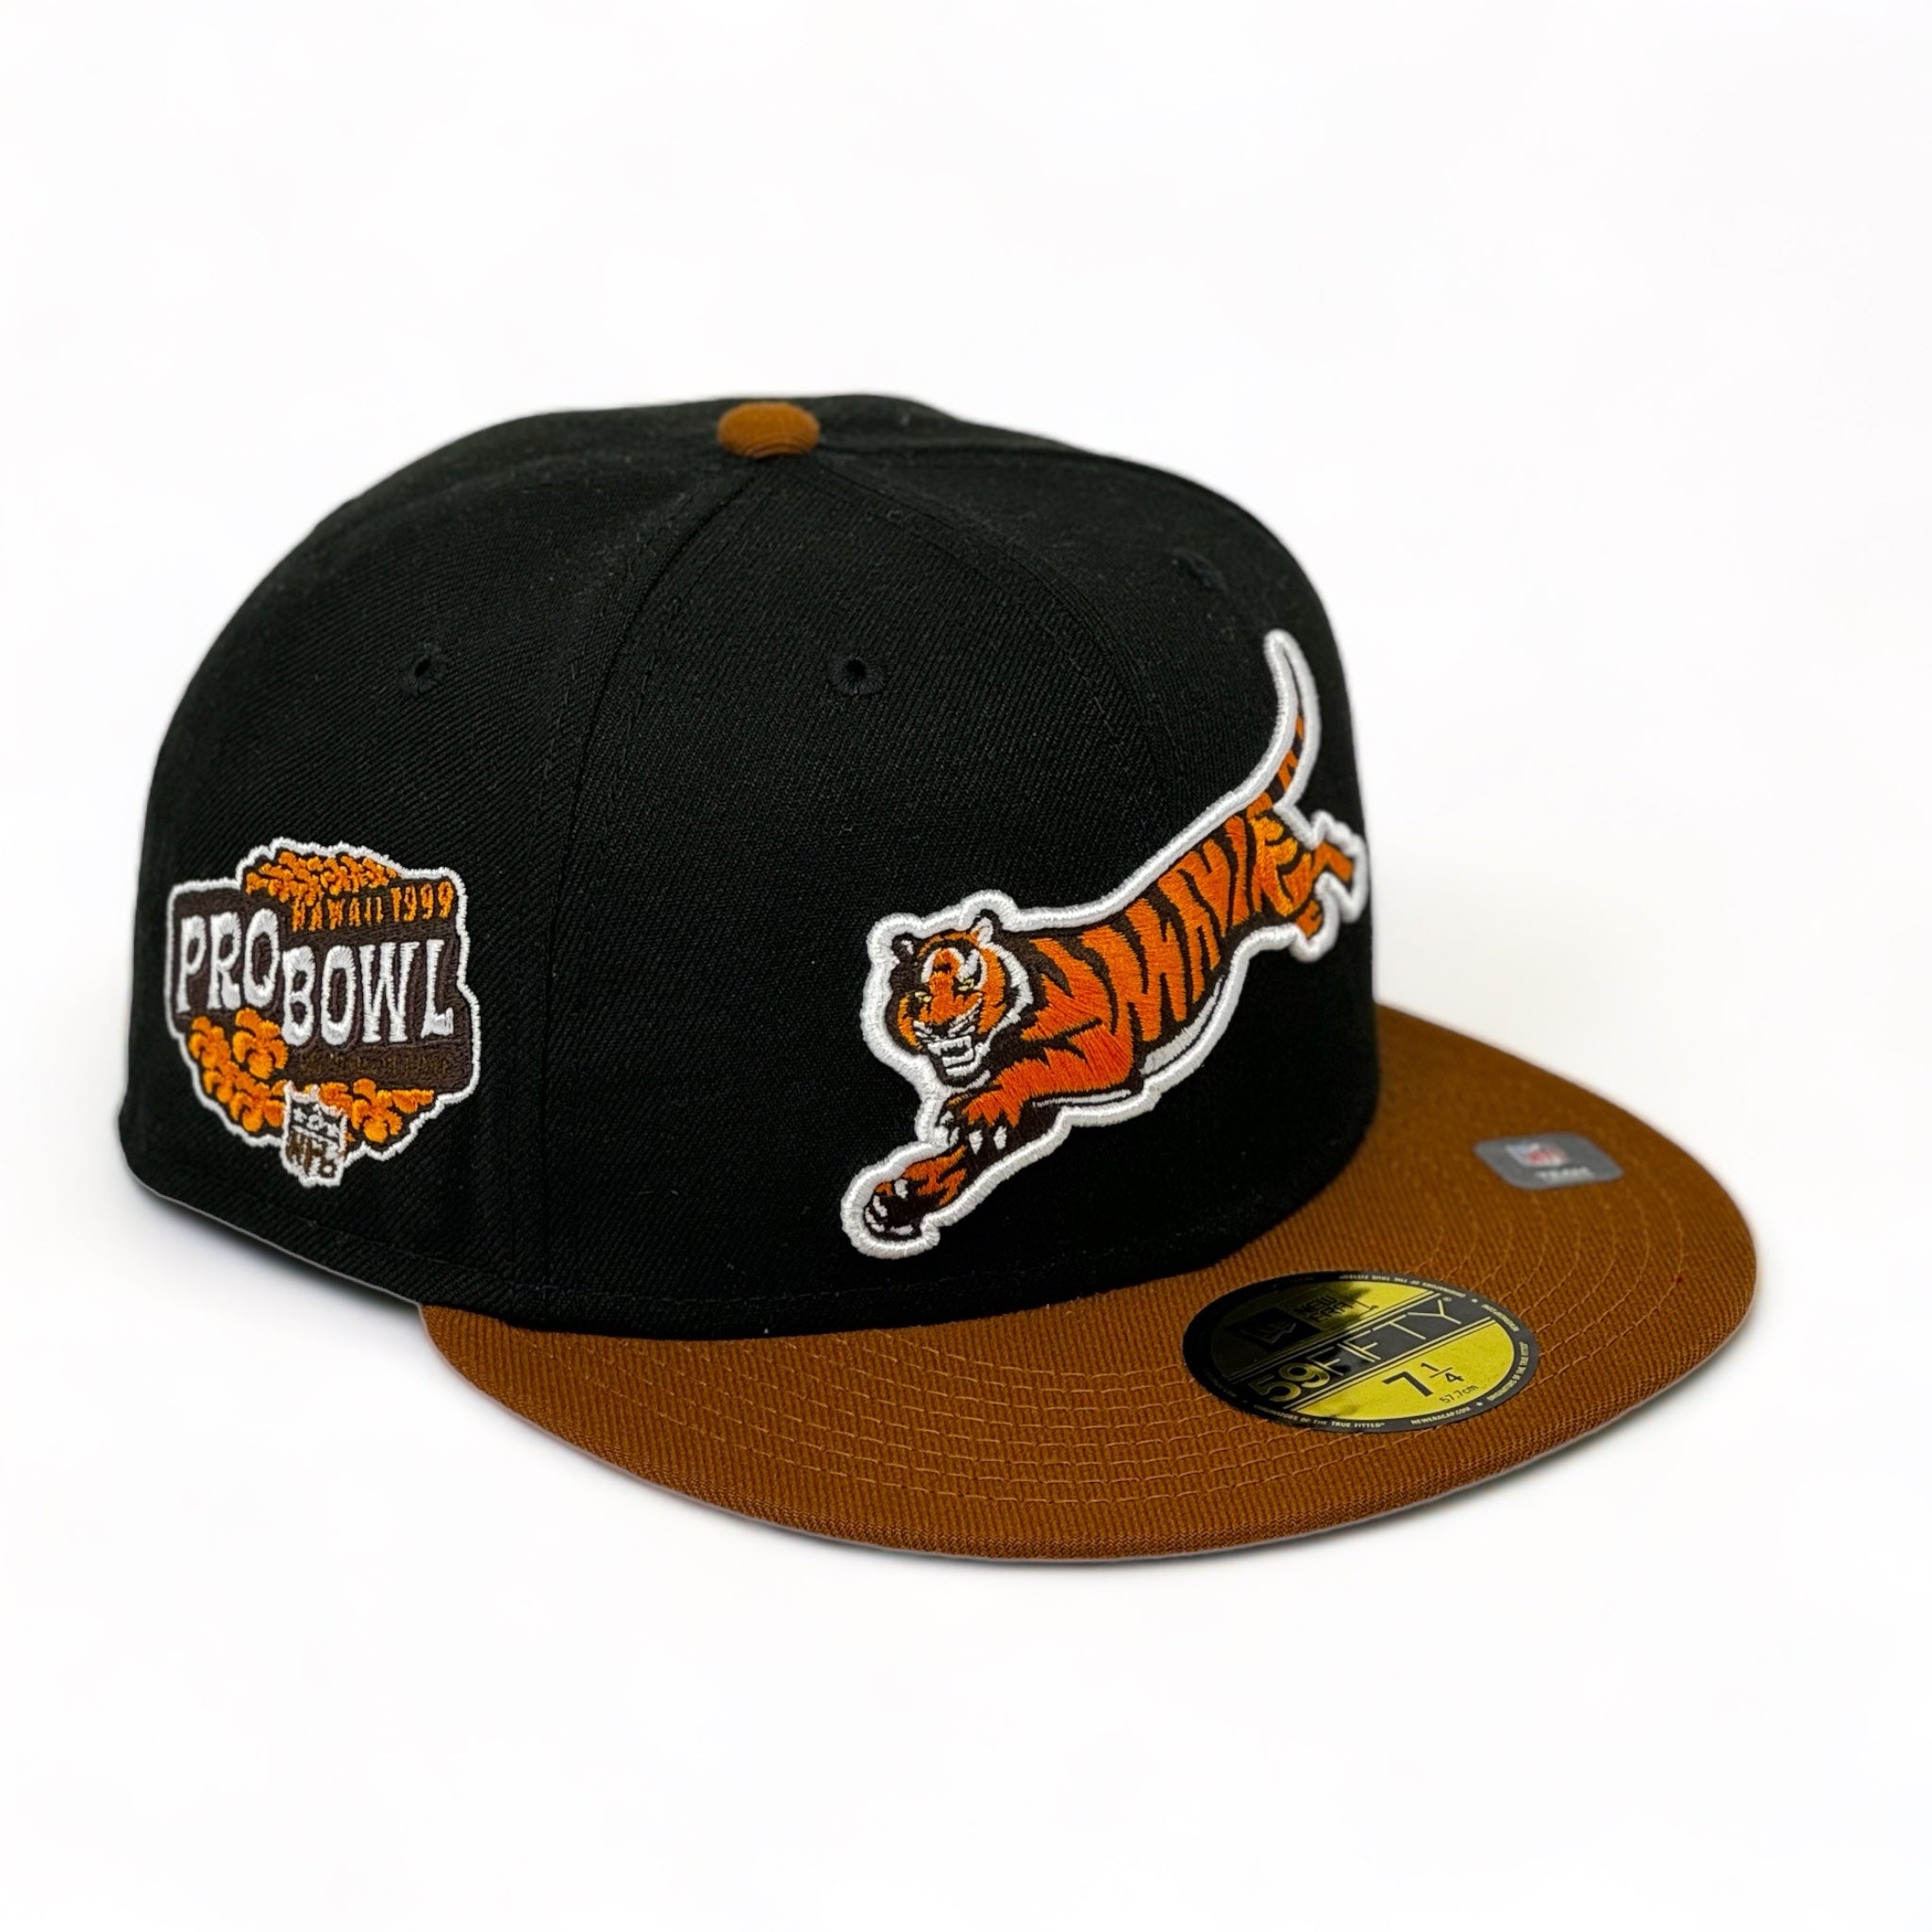 CINCINATTI BENGALS (1999 PRO BOWL) NEW ERA 59FIFTY EXCLUSIVE FITTED